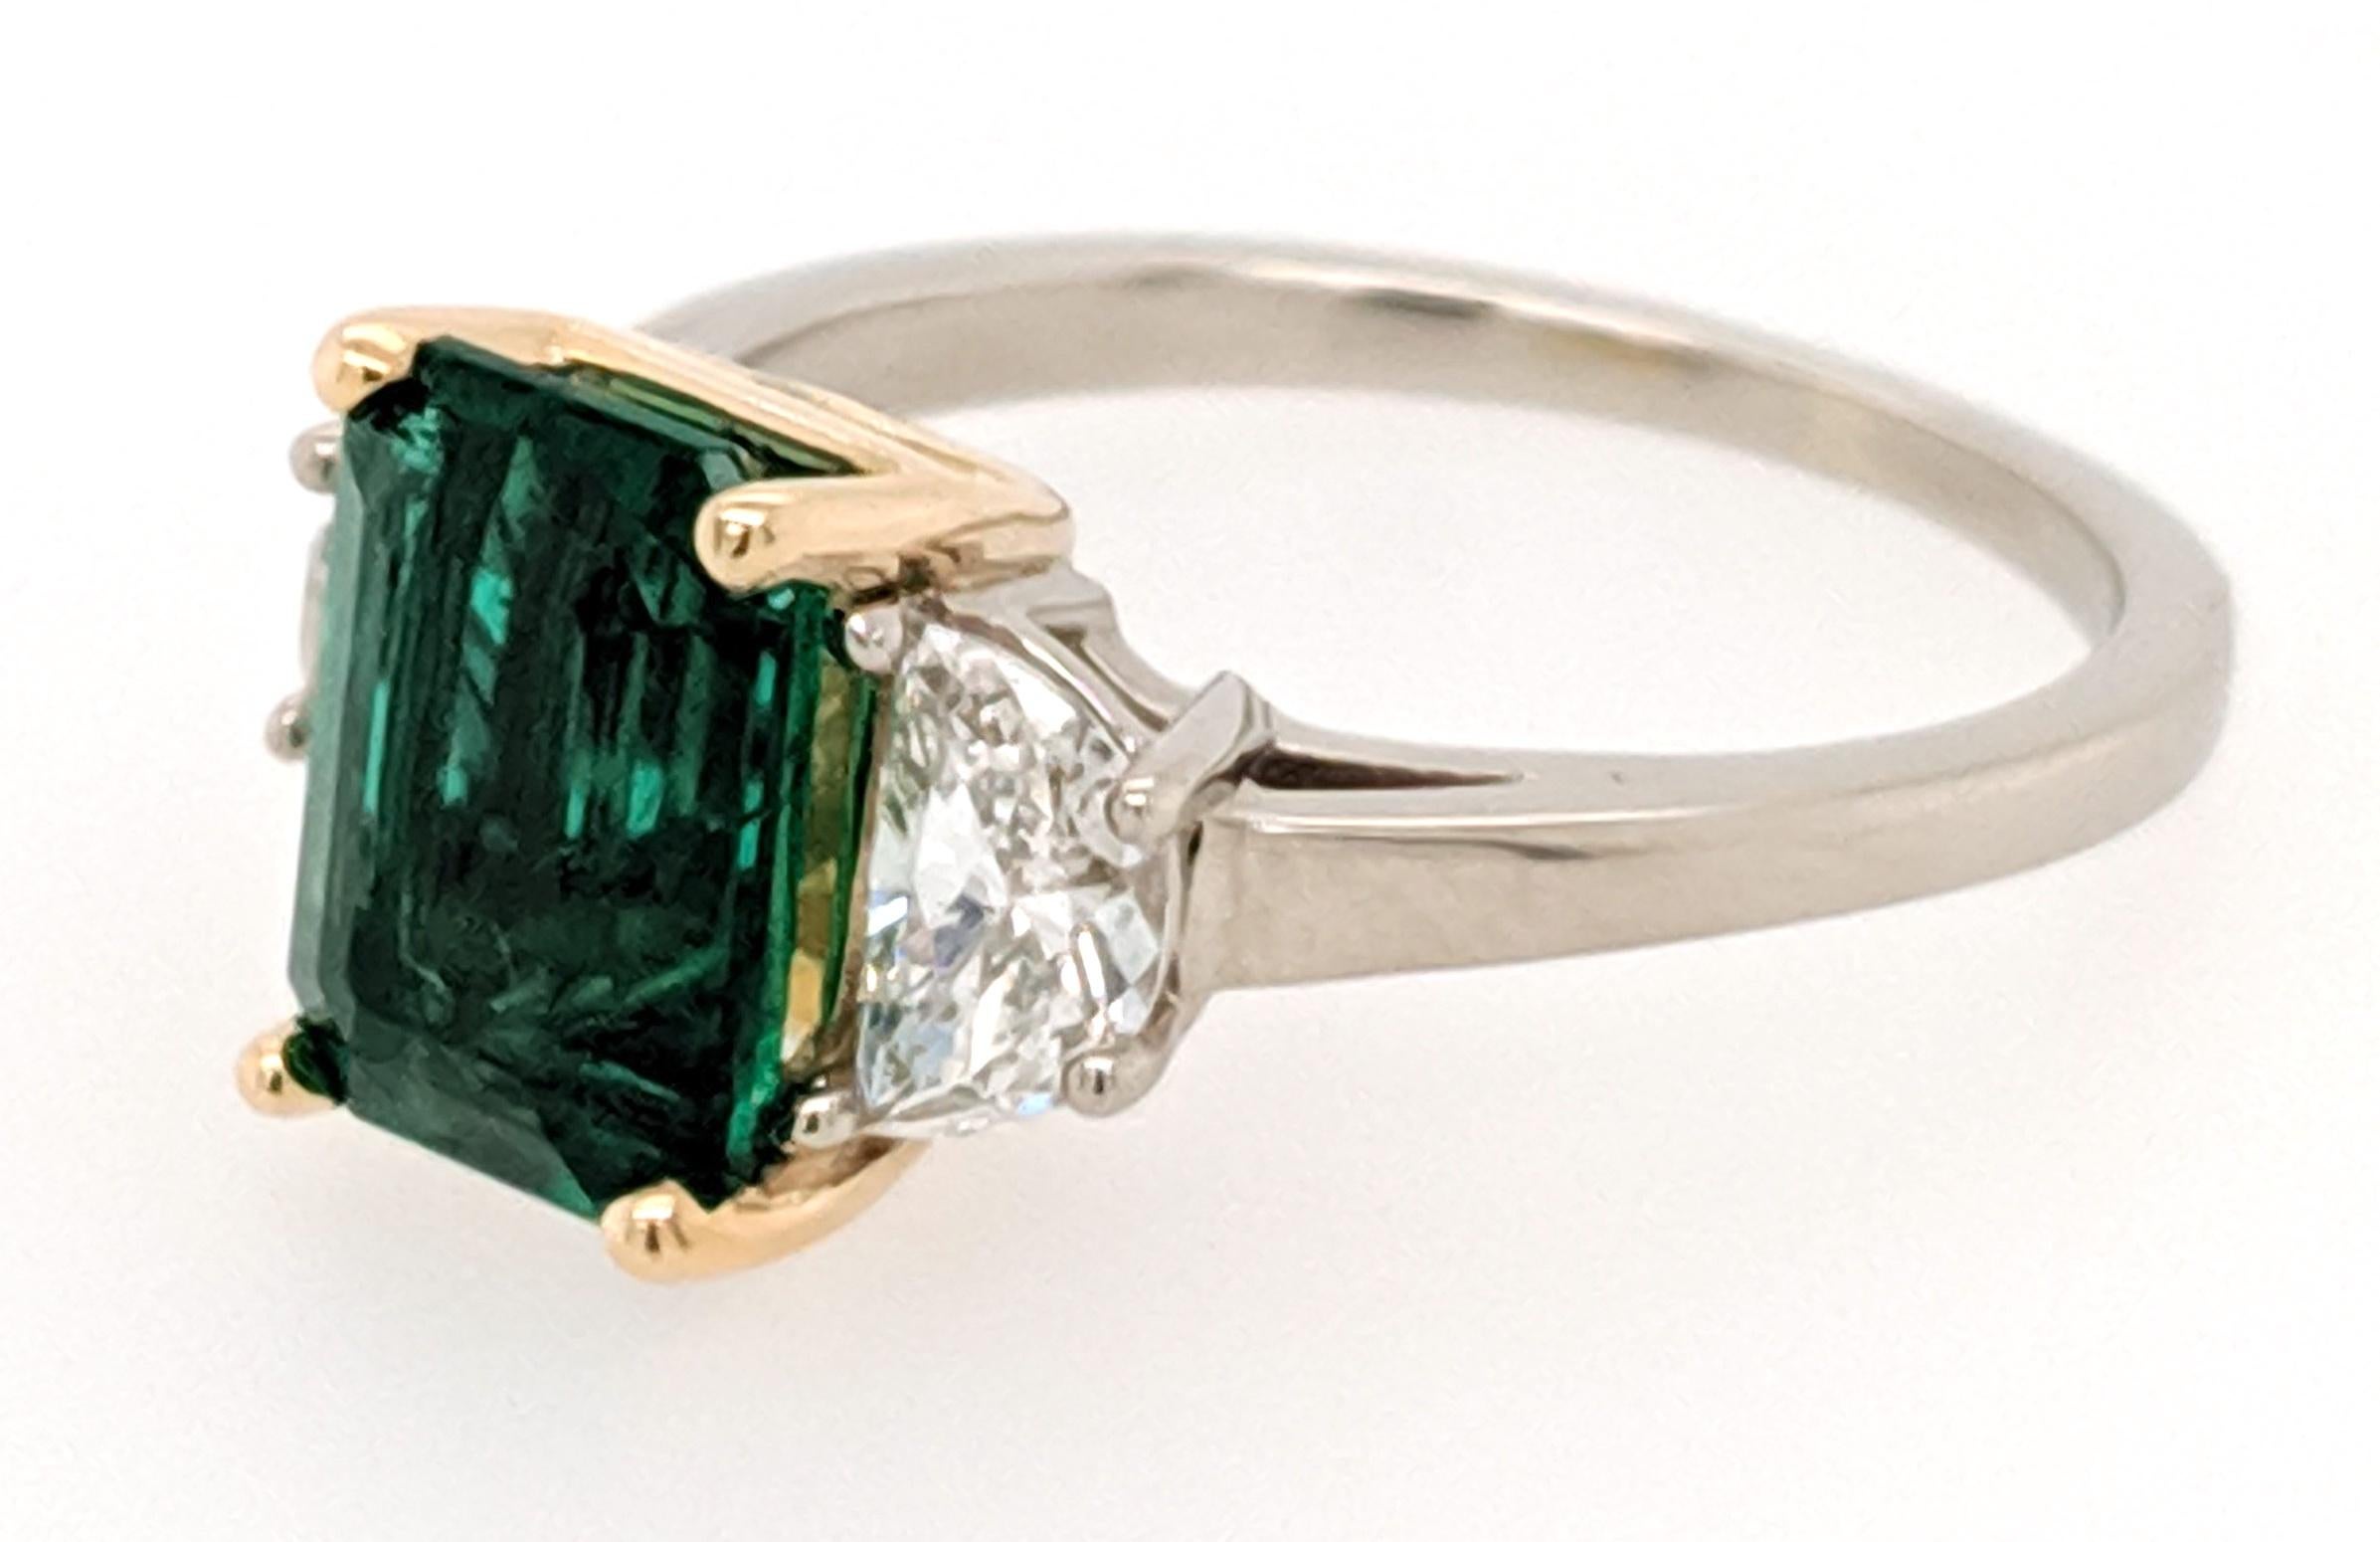 The Emerald and Diamond 3 stone ring is crafted in 18k white gold with a 18k yellow gold box and features (1) Emerald cut Zambian Emerald weighing 2.05ct and flanked by (2) half moon diamonds weighing .63 cttw with a color of F/G and a clarity of